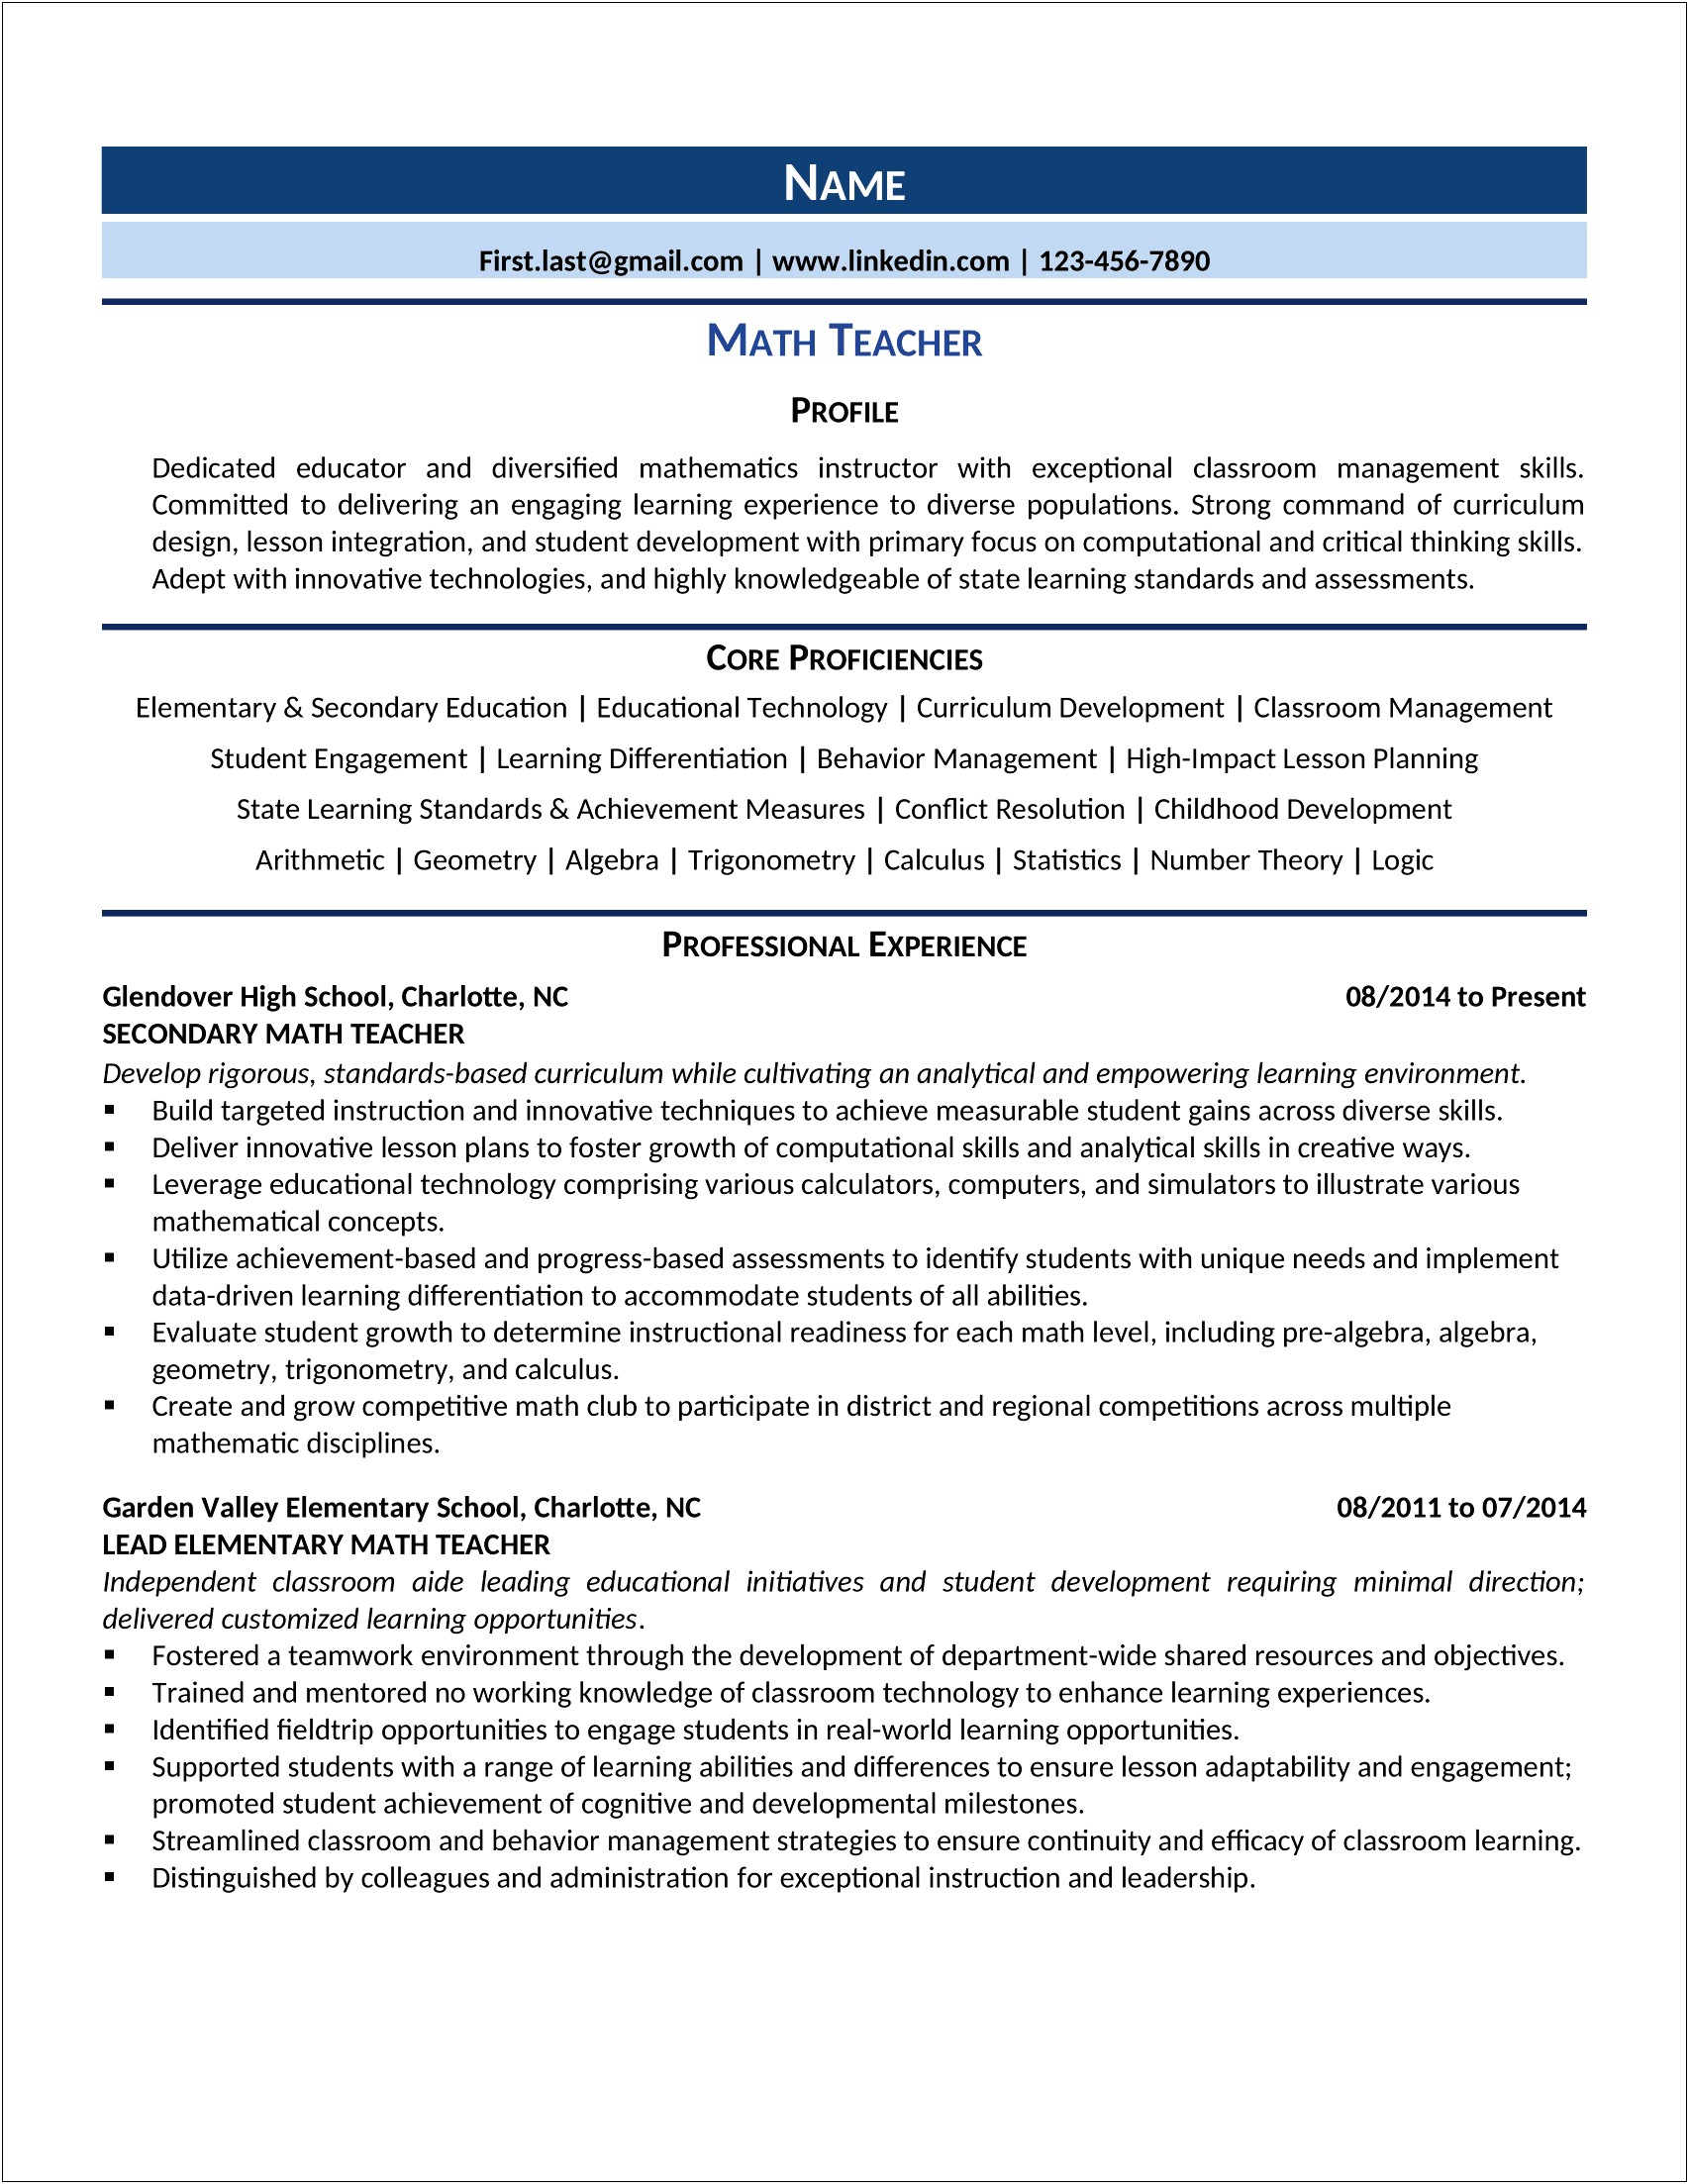 Educator With Combined Experience Resume Statement Examples